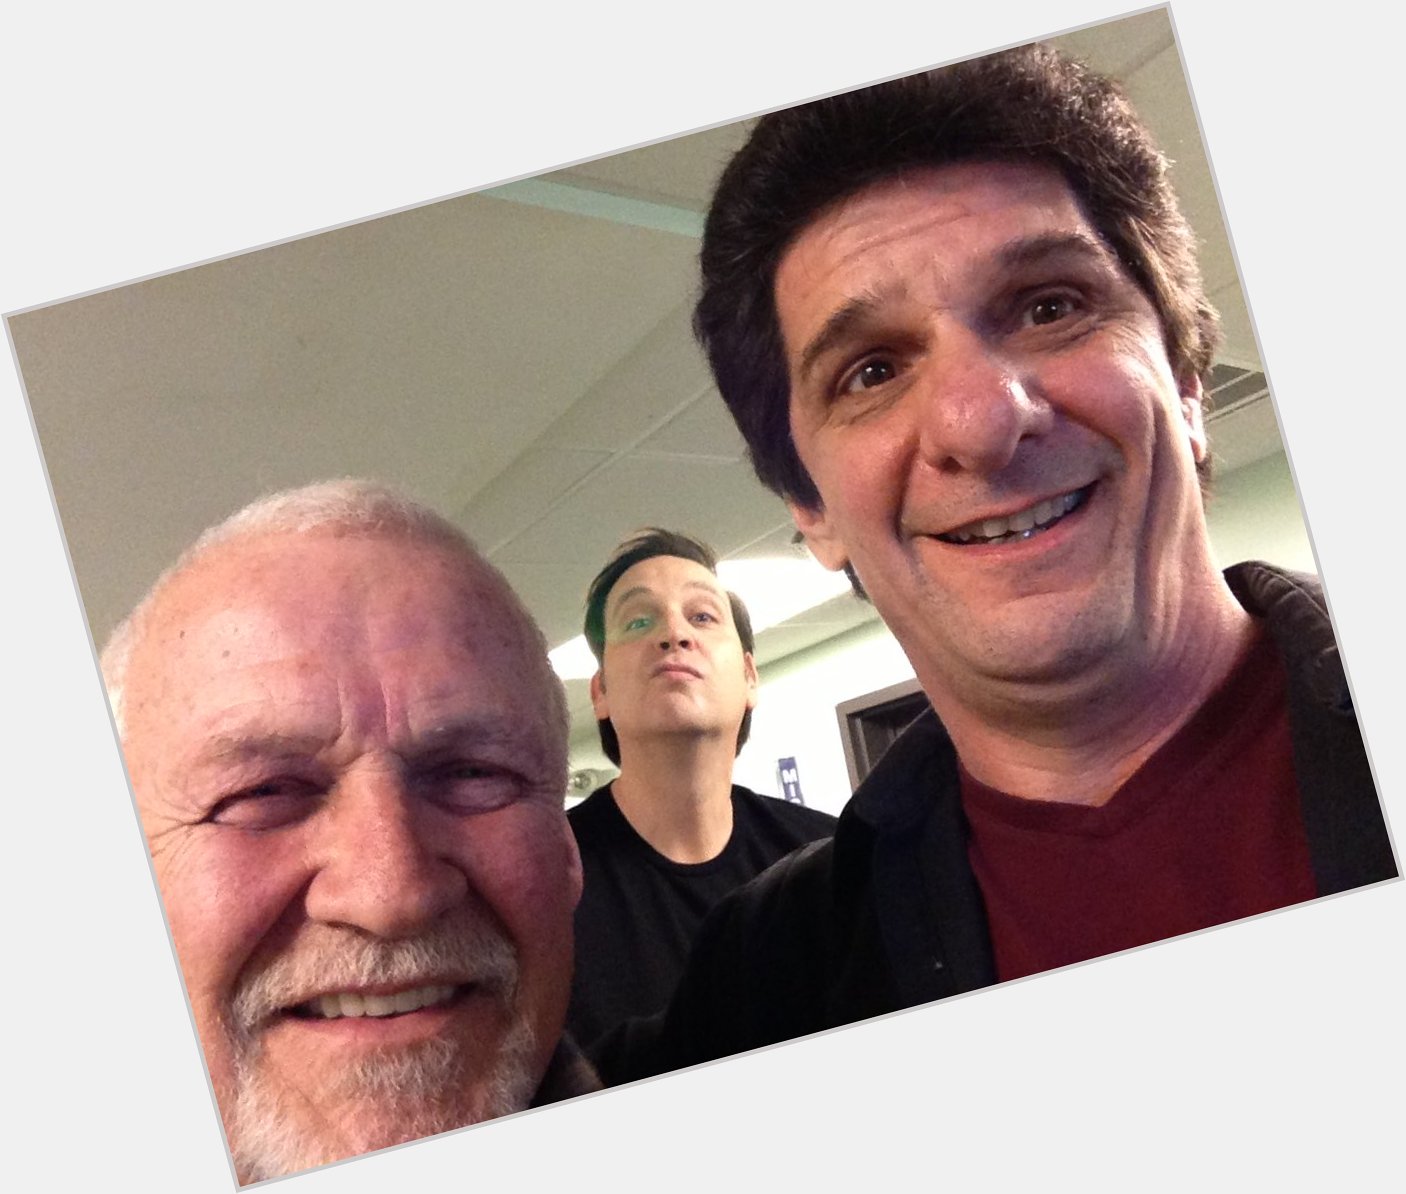 The very first selfie I ever took. Happy 76 birthday to Bernie Parent! Nice photo bomb by  